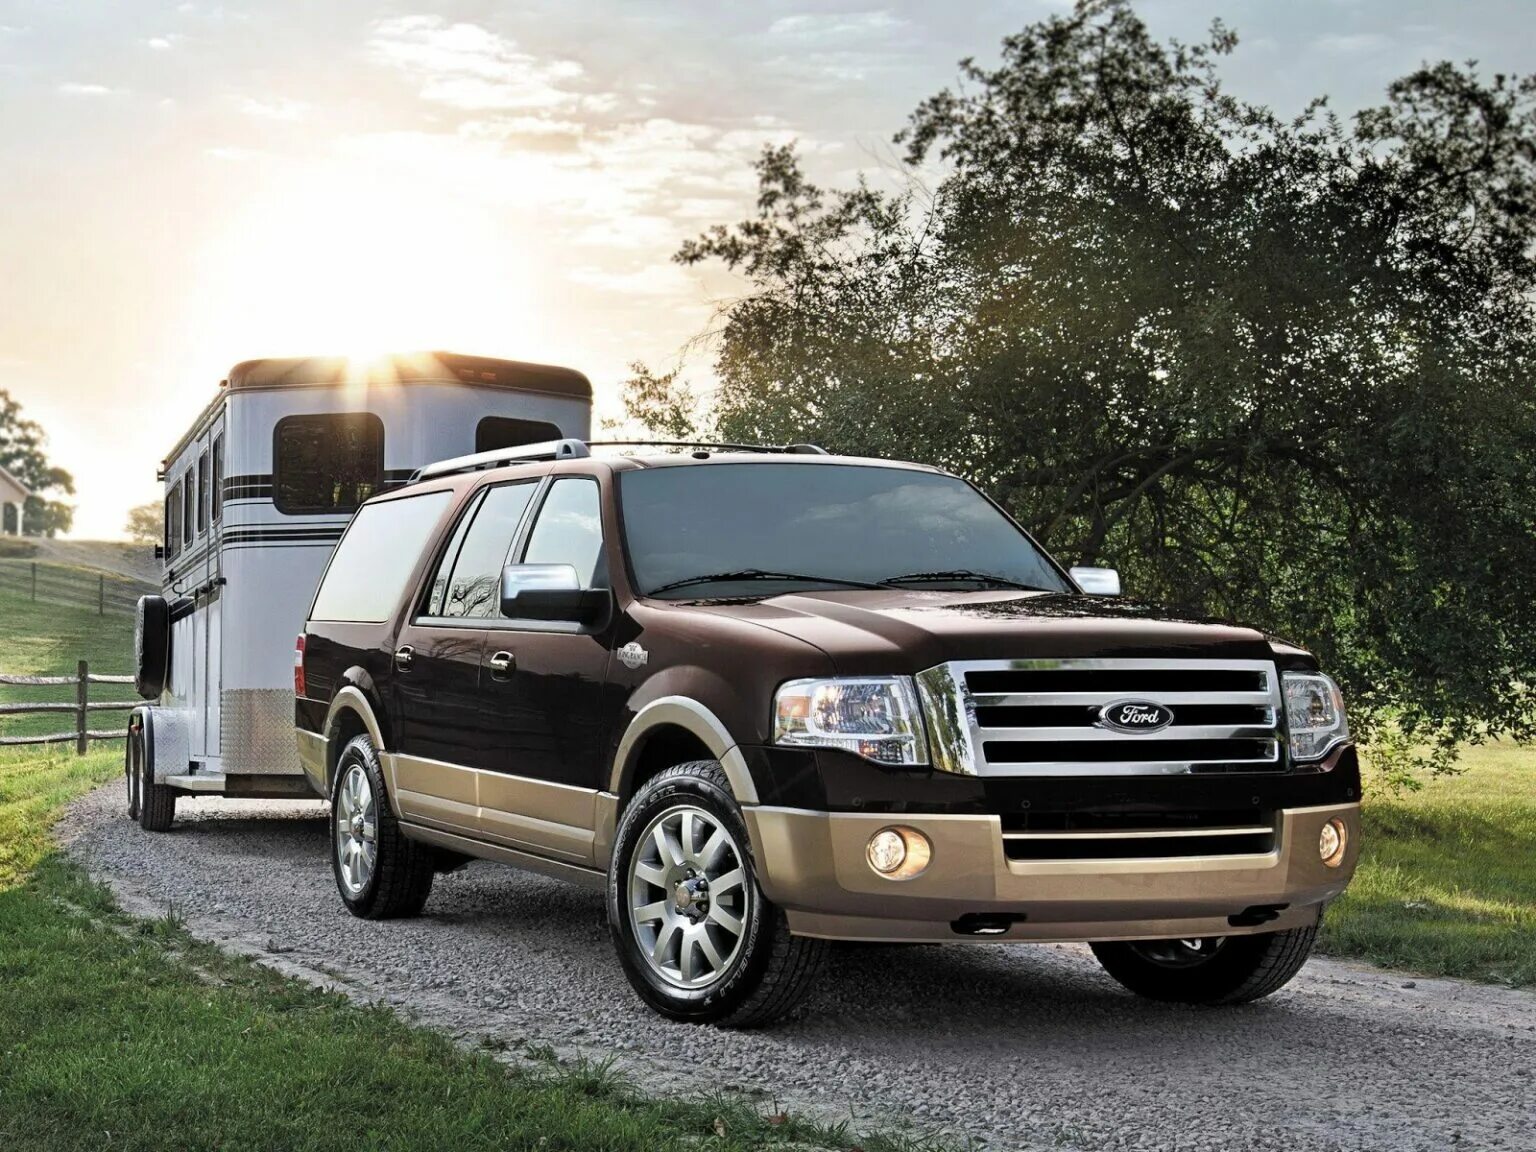 Ford Expedition 2014. Форд Экспедишн 5. Ford Expedition el 2006. Ford Expedition u324.